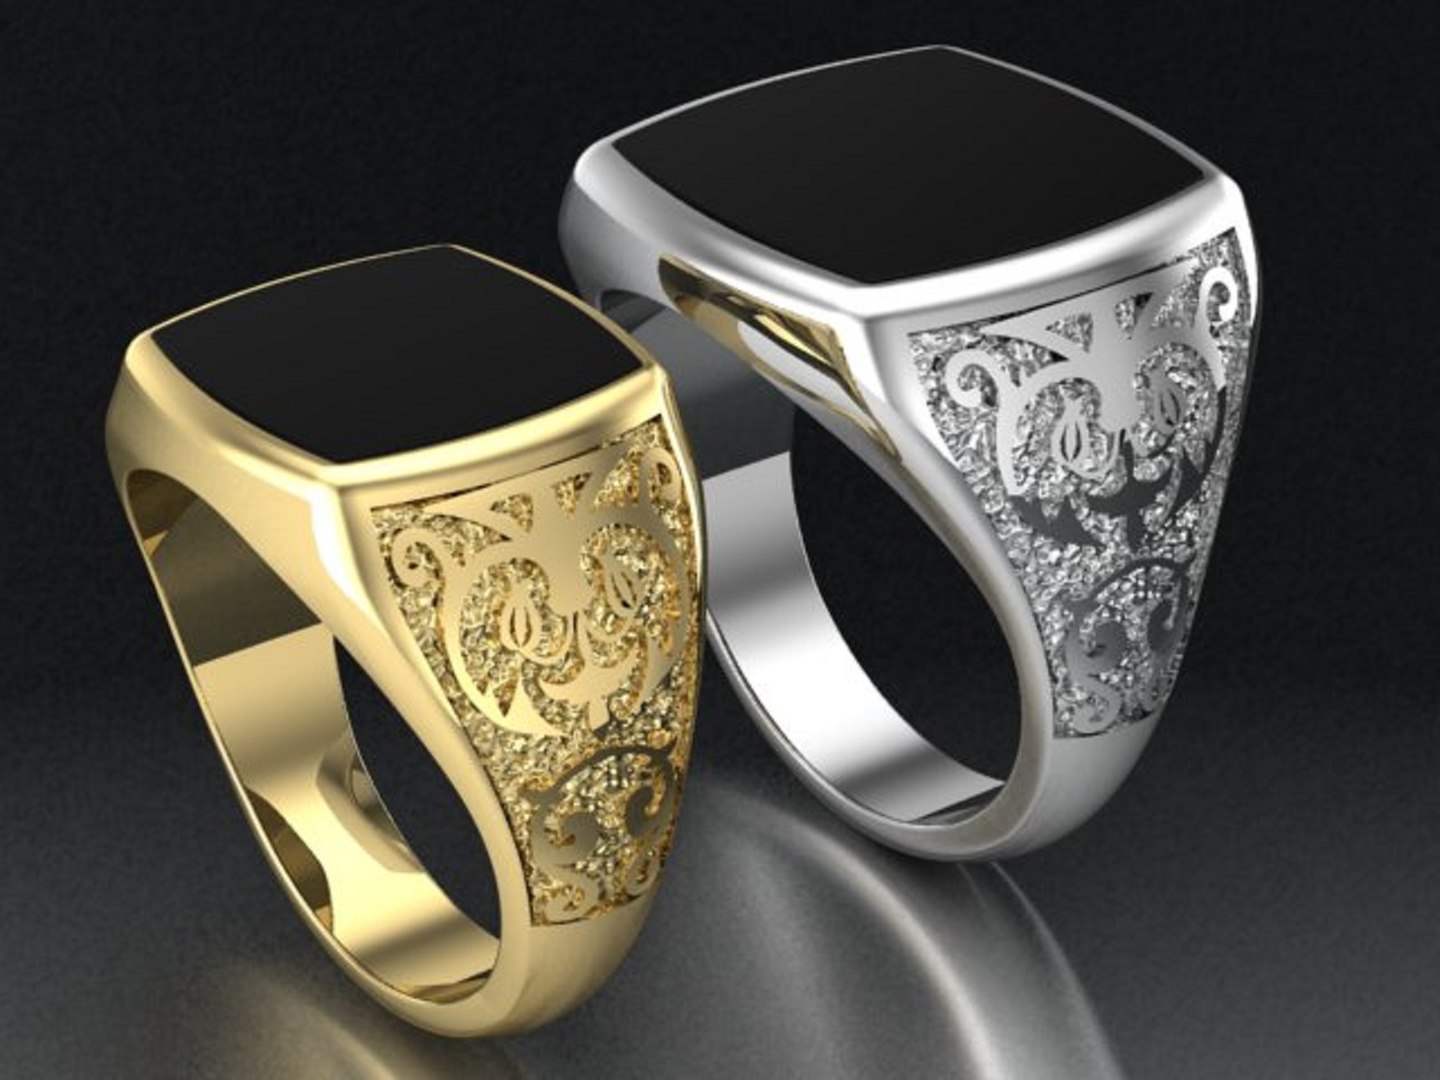 Mens Ring With Black Onyx Two Options 3D Model - TurboSquid 1819027